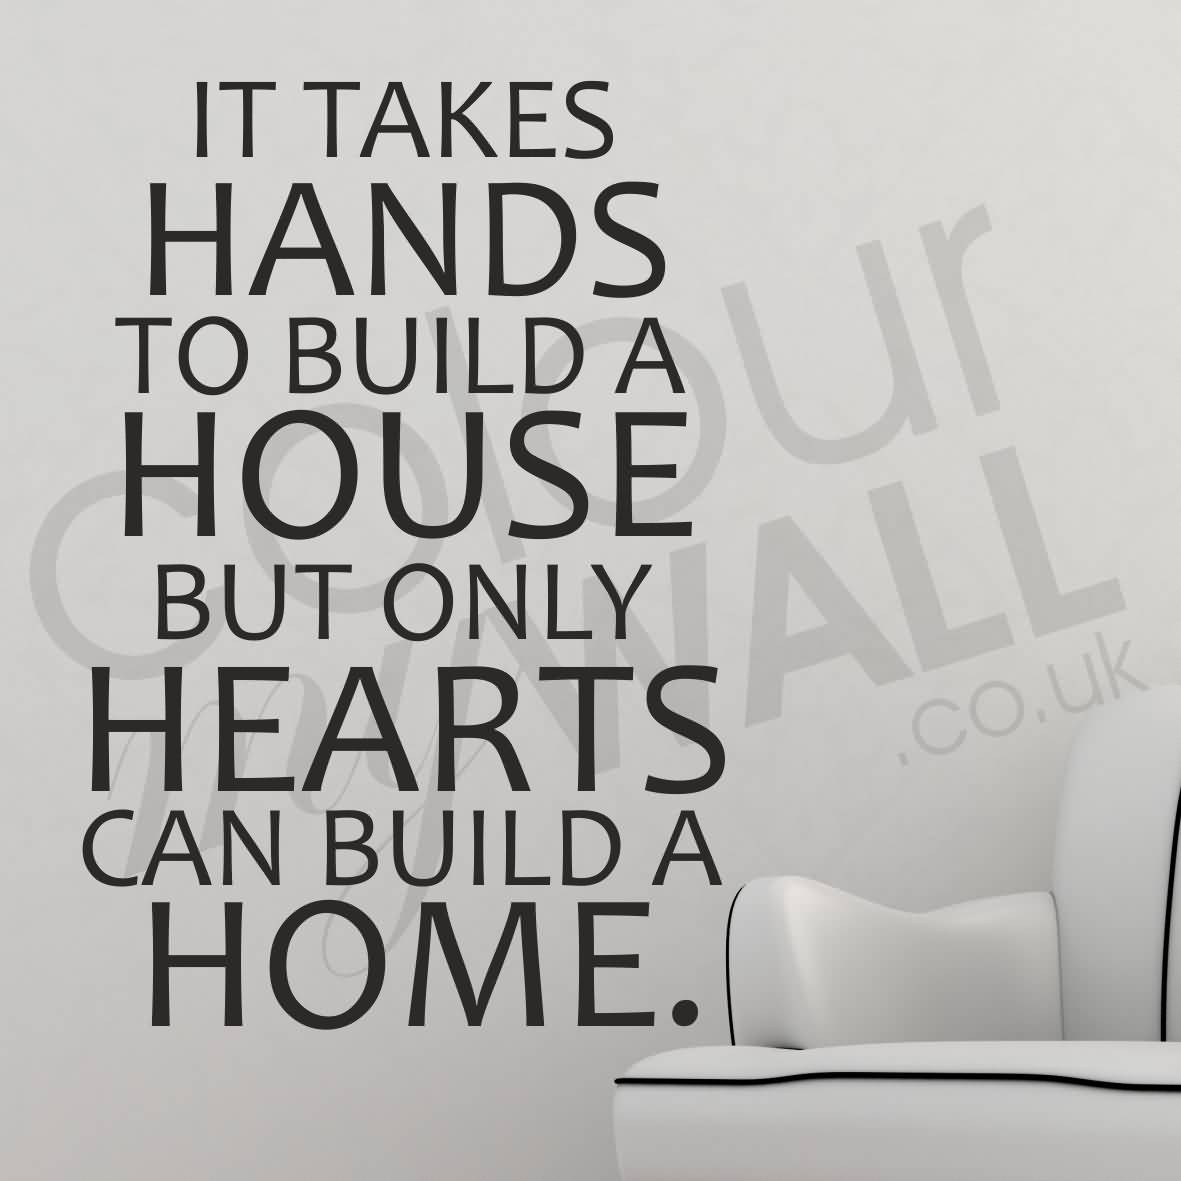 It takes hands to build a house, but only hearts can build a home.